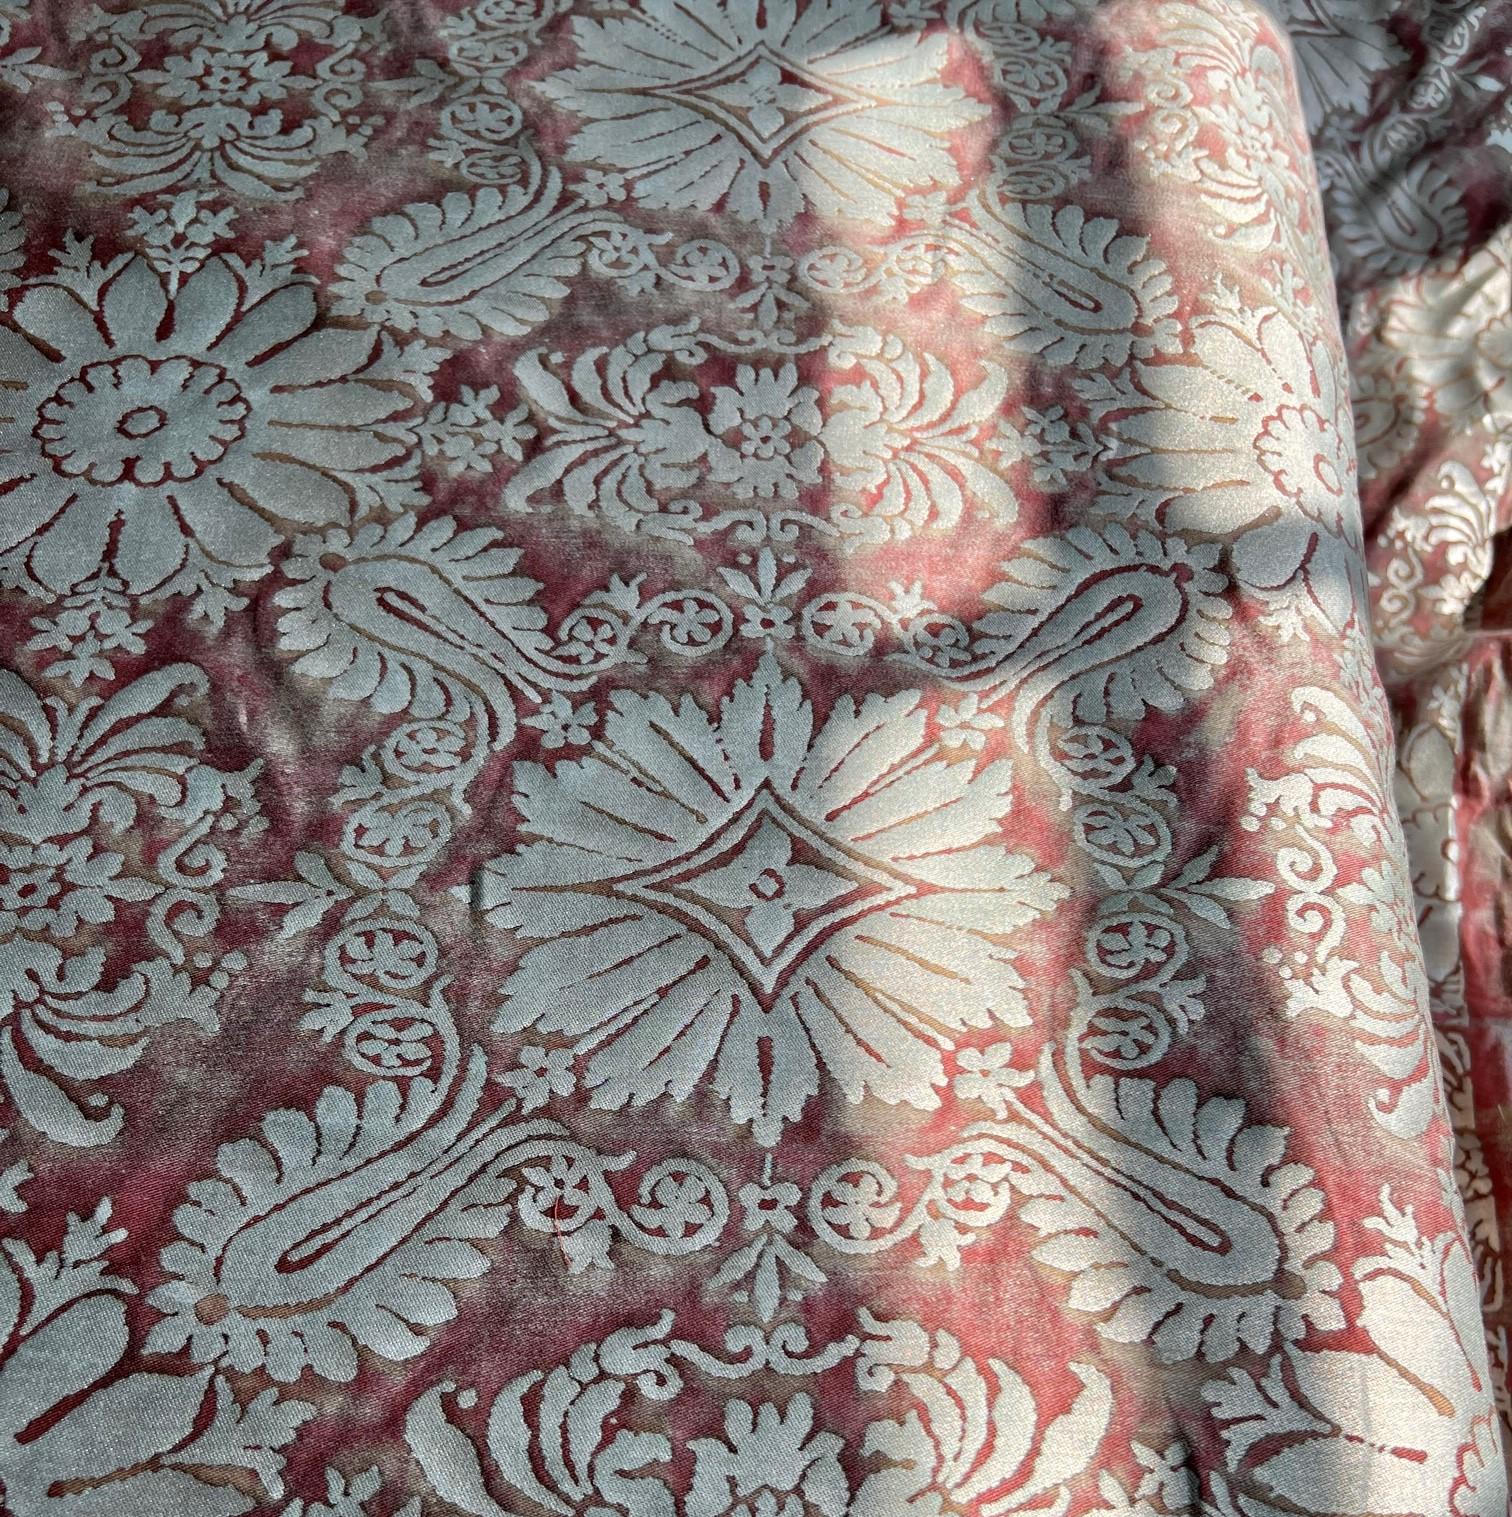 Hand-Crafted Venetian Fortuny Impero Fabric in Copper and Silvery Gold